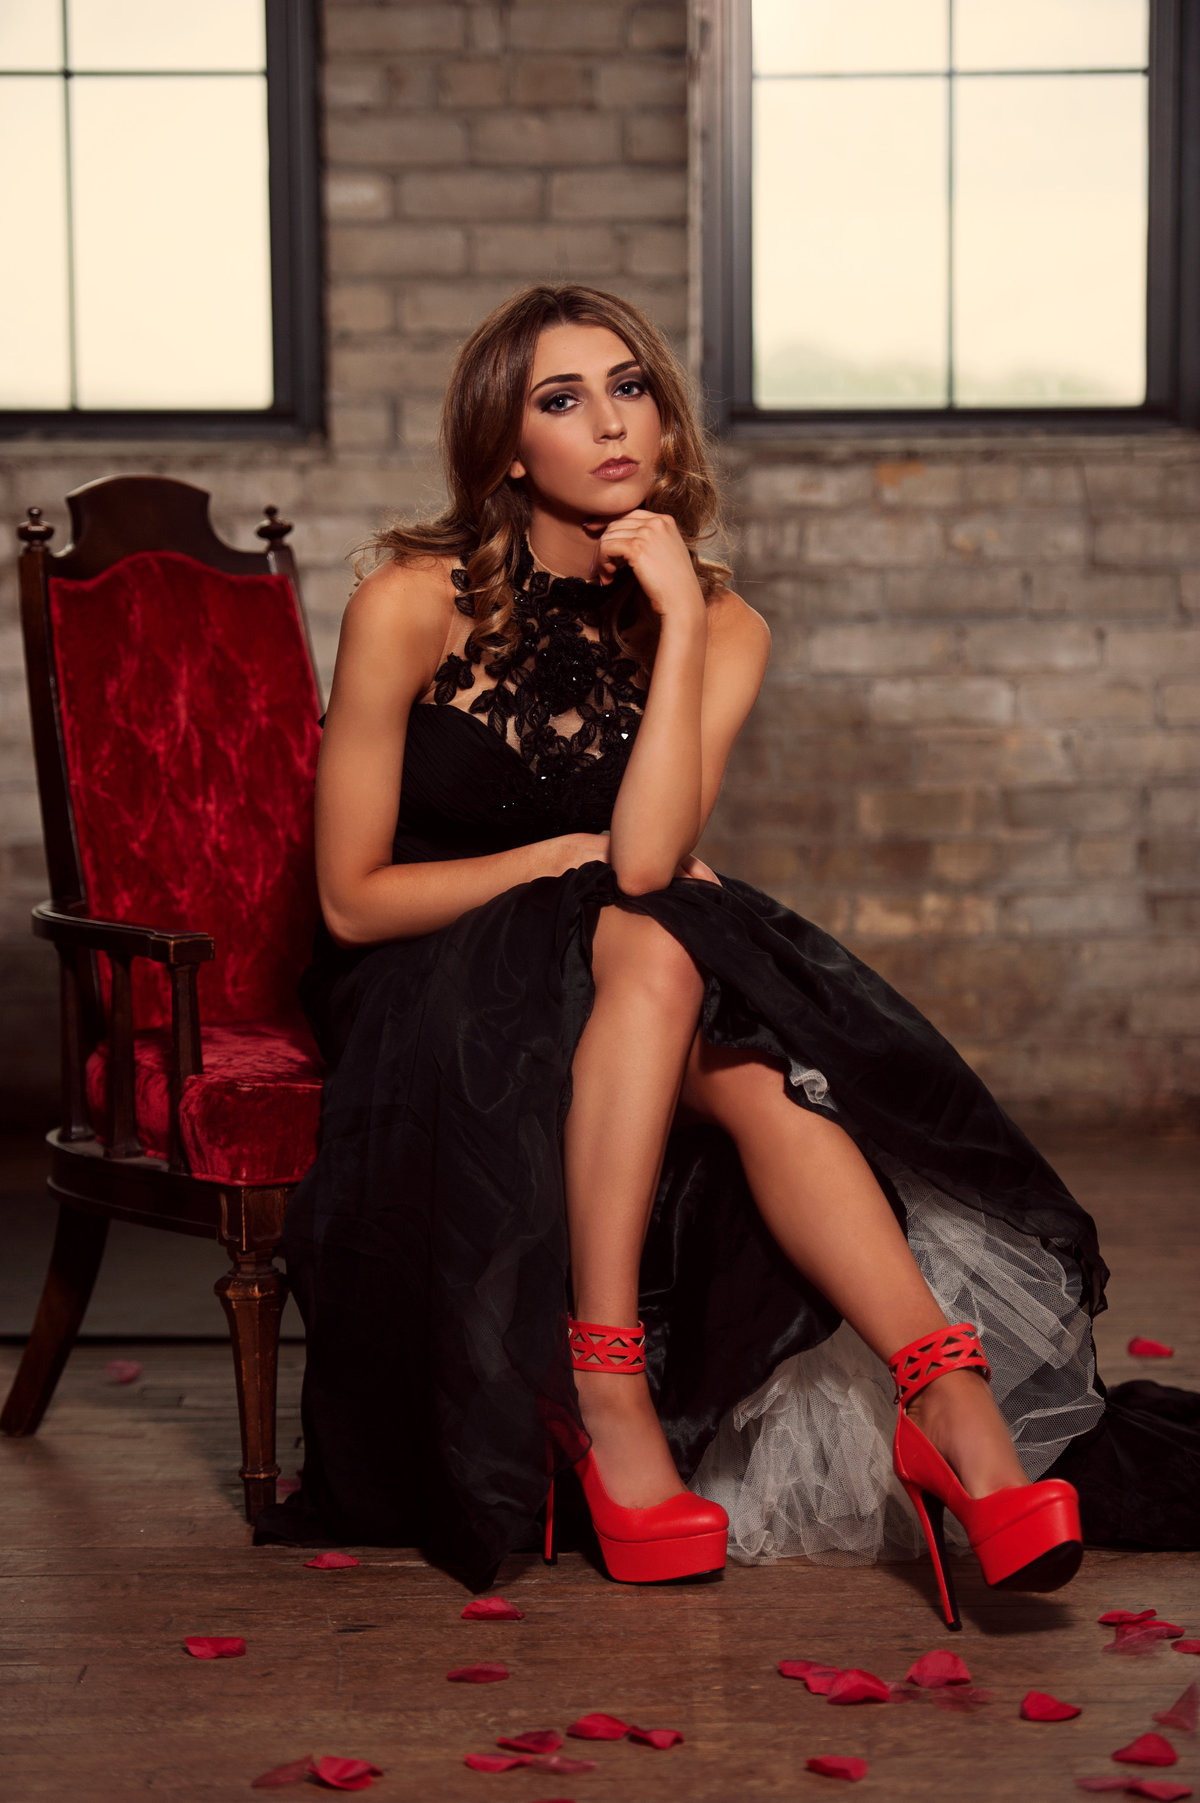 Girl in black dress and high heeled red shoes